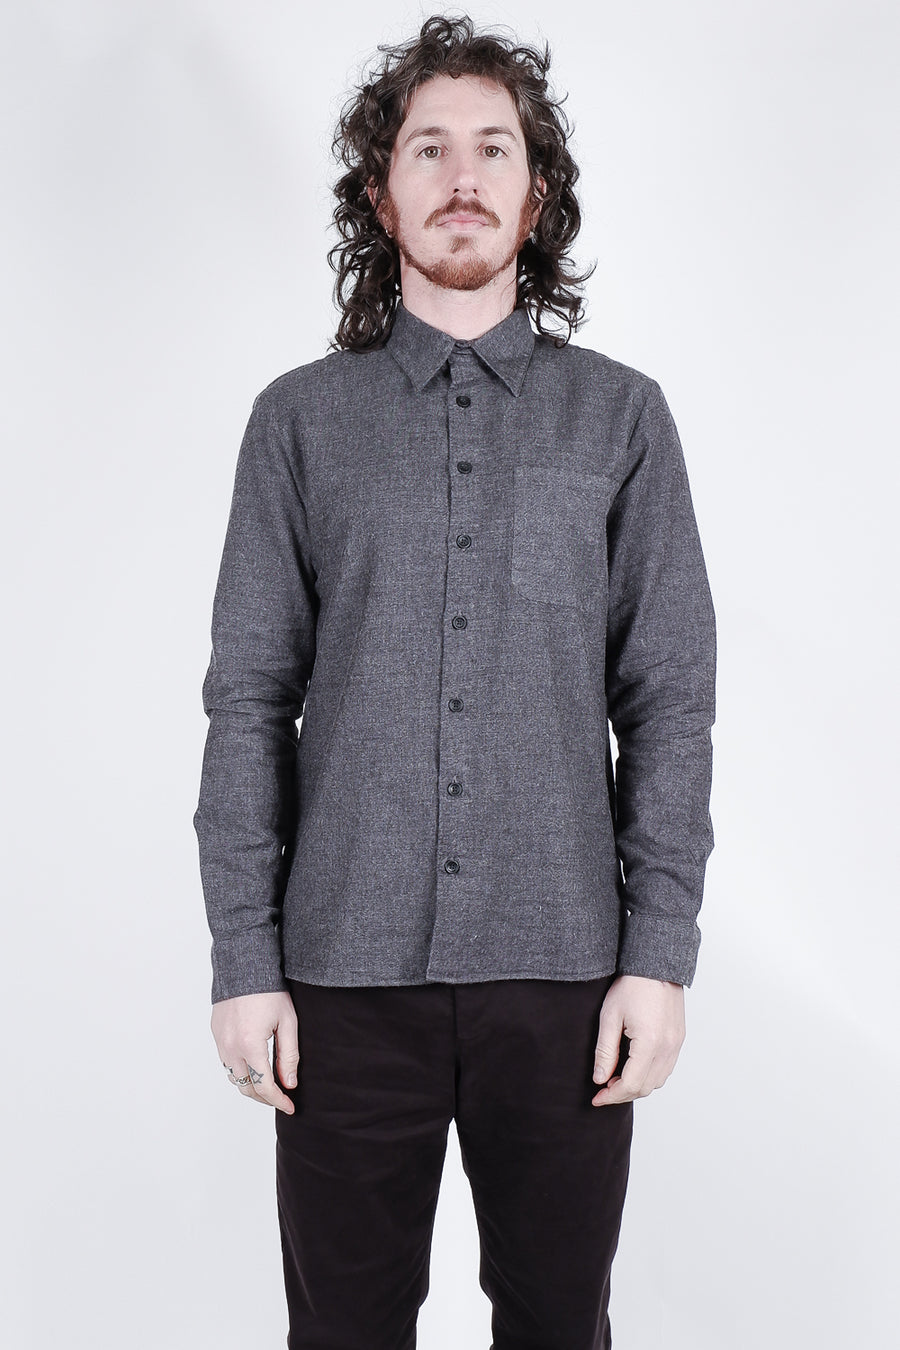 Buy the Hannes Roether Cotton/Wool Shirt in Grey at Intro. Spend £50 for free UK delivery. Official stockists. We ship worldwide.